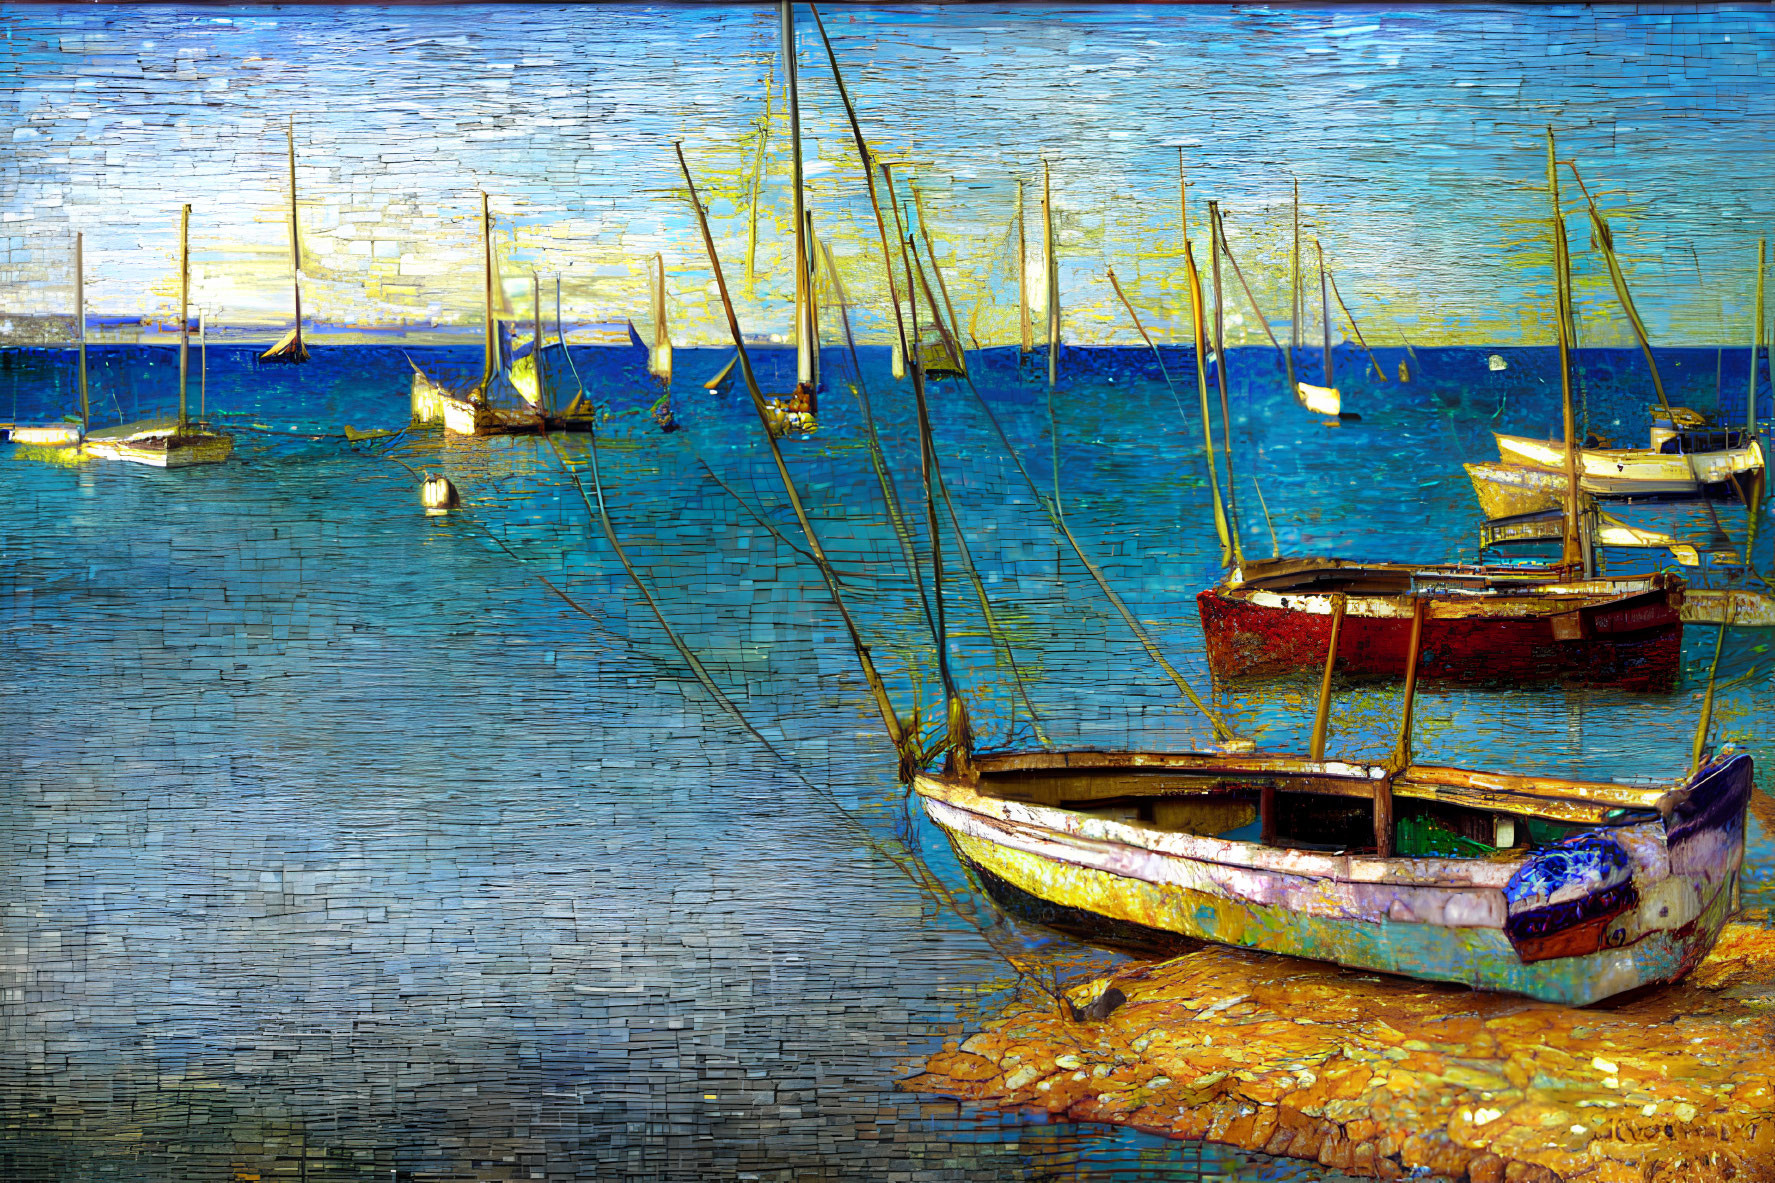 Vibrant Boat Painting with Textured Brushstrokes